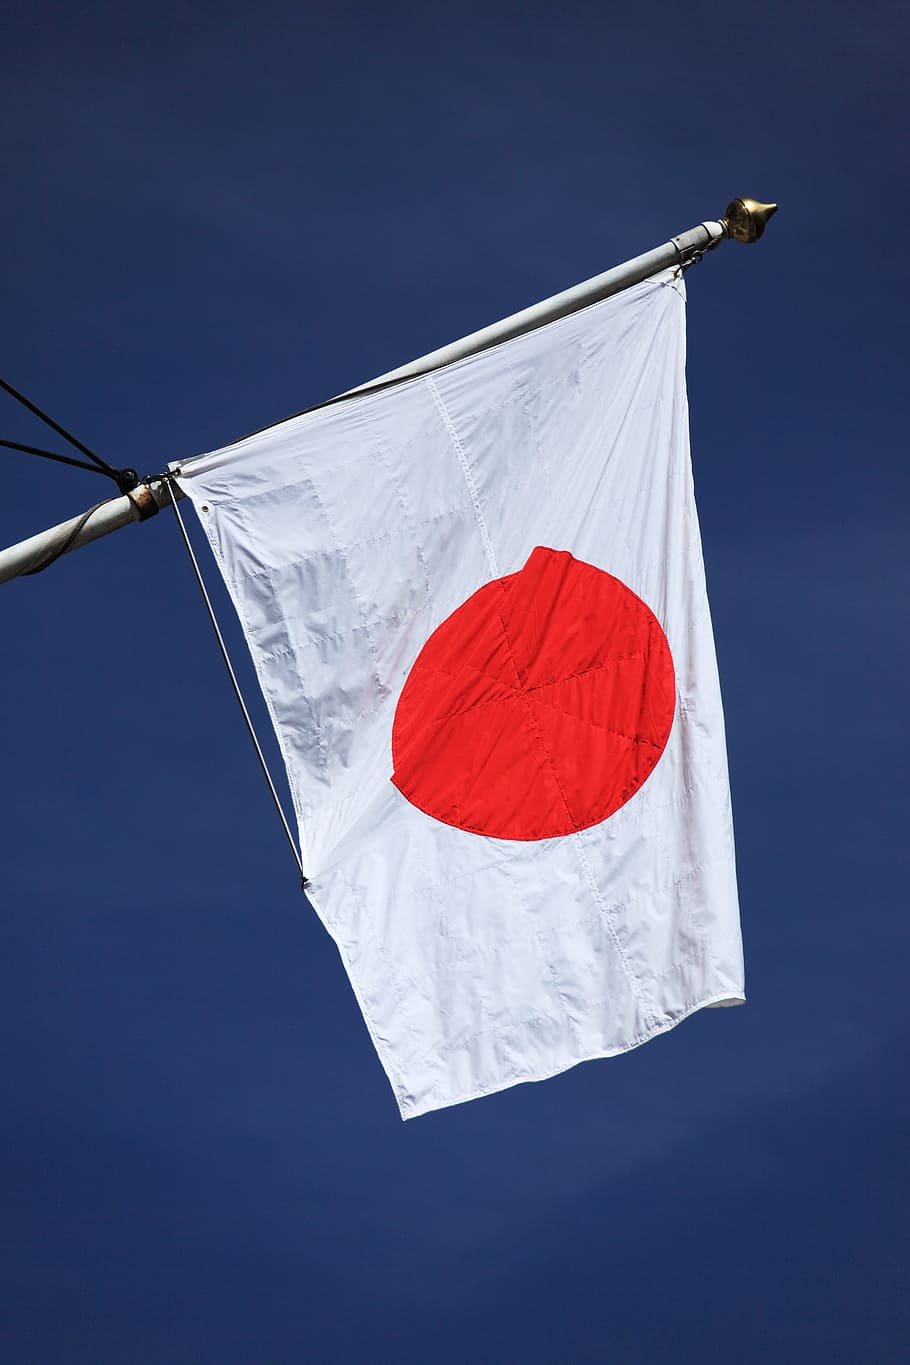 Japan on white polo during day, Asia, Asian, Country, Flag, blue